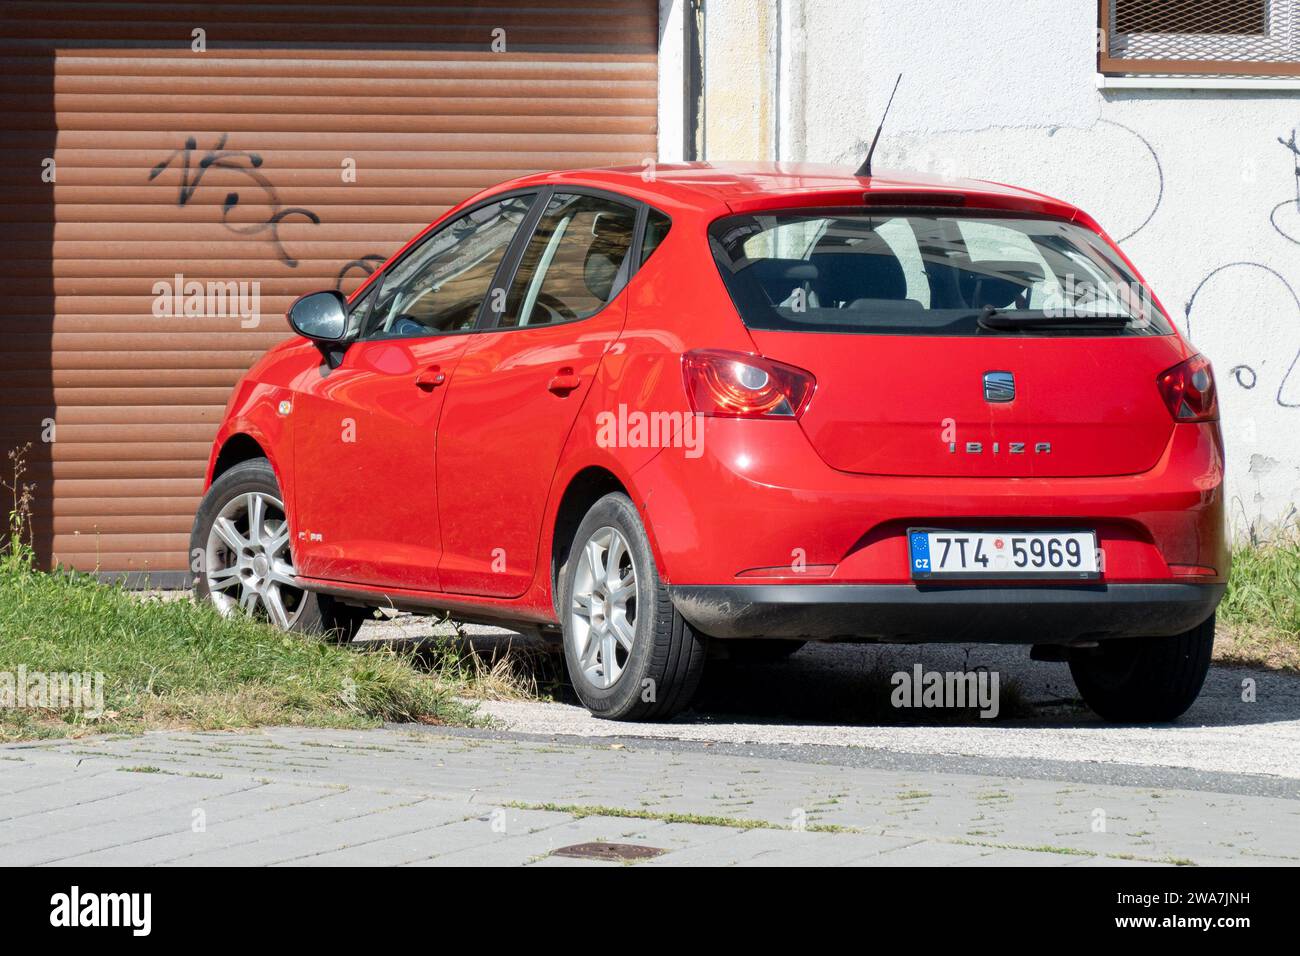 HAVIROV, CZECH REPUBLIC - AUGUST 24, 2023: Red Seat Ibiza hatchback car parked in front of a garage Stock Photo